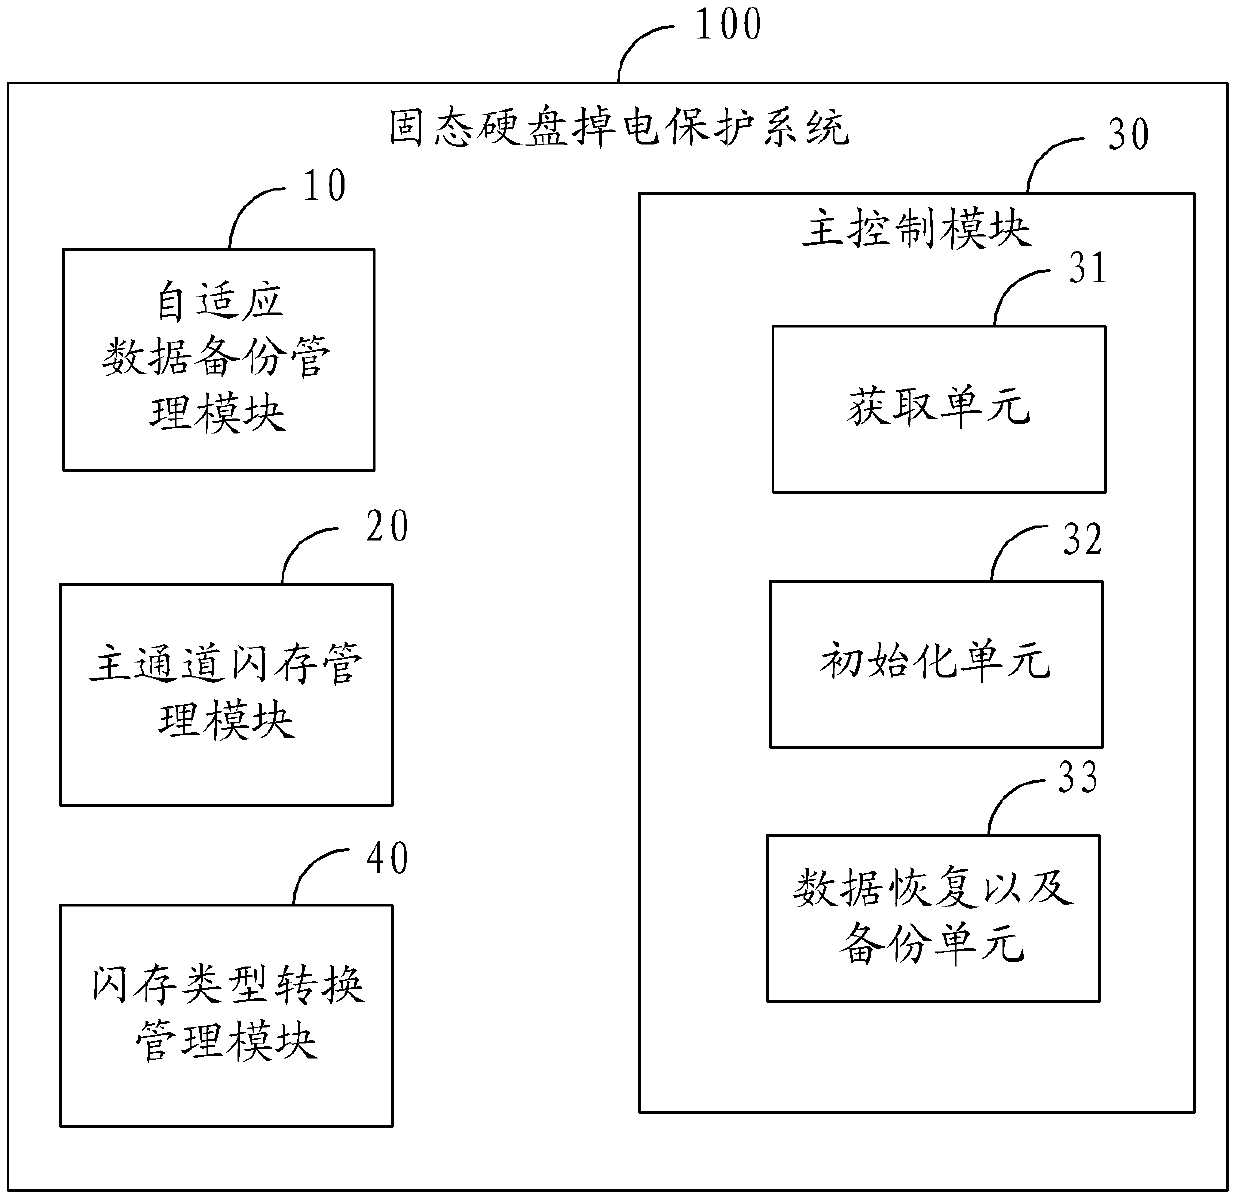 Solid state disc and power failure protection method and system thereof